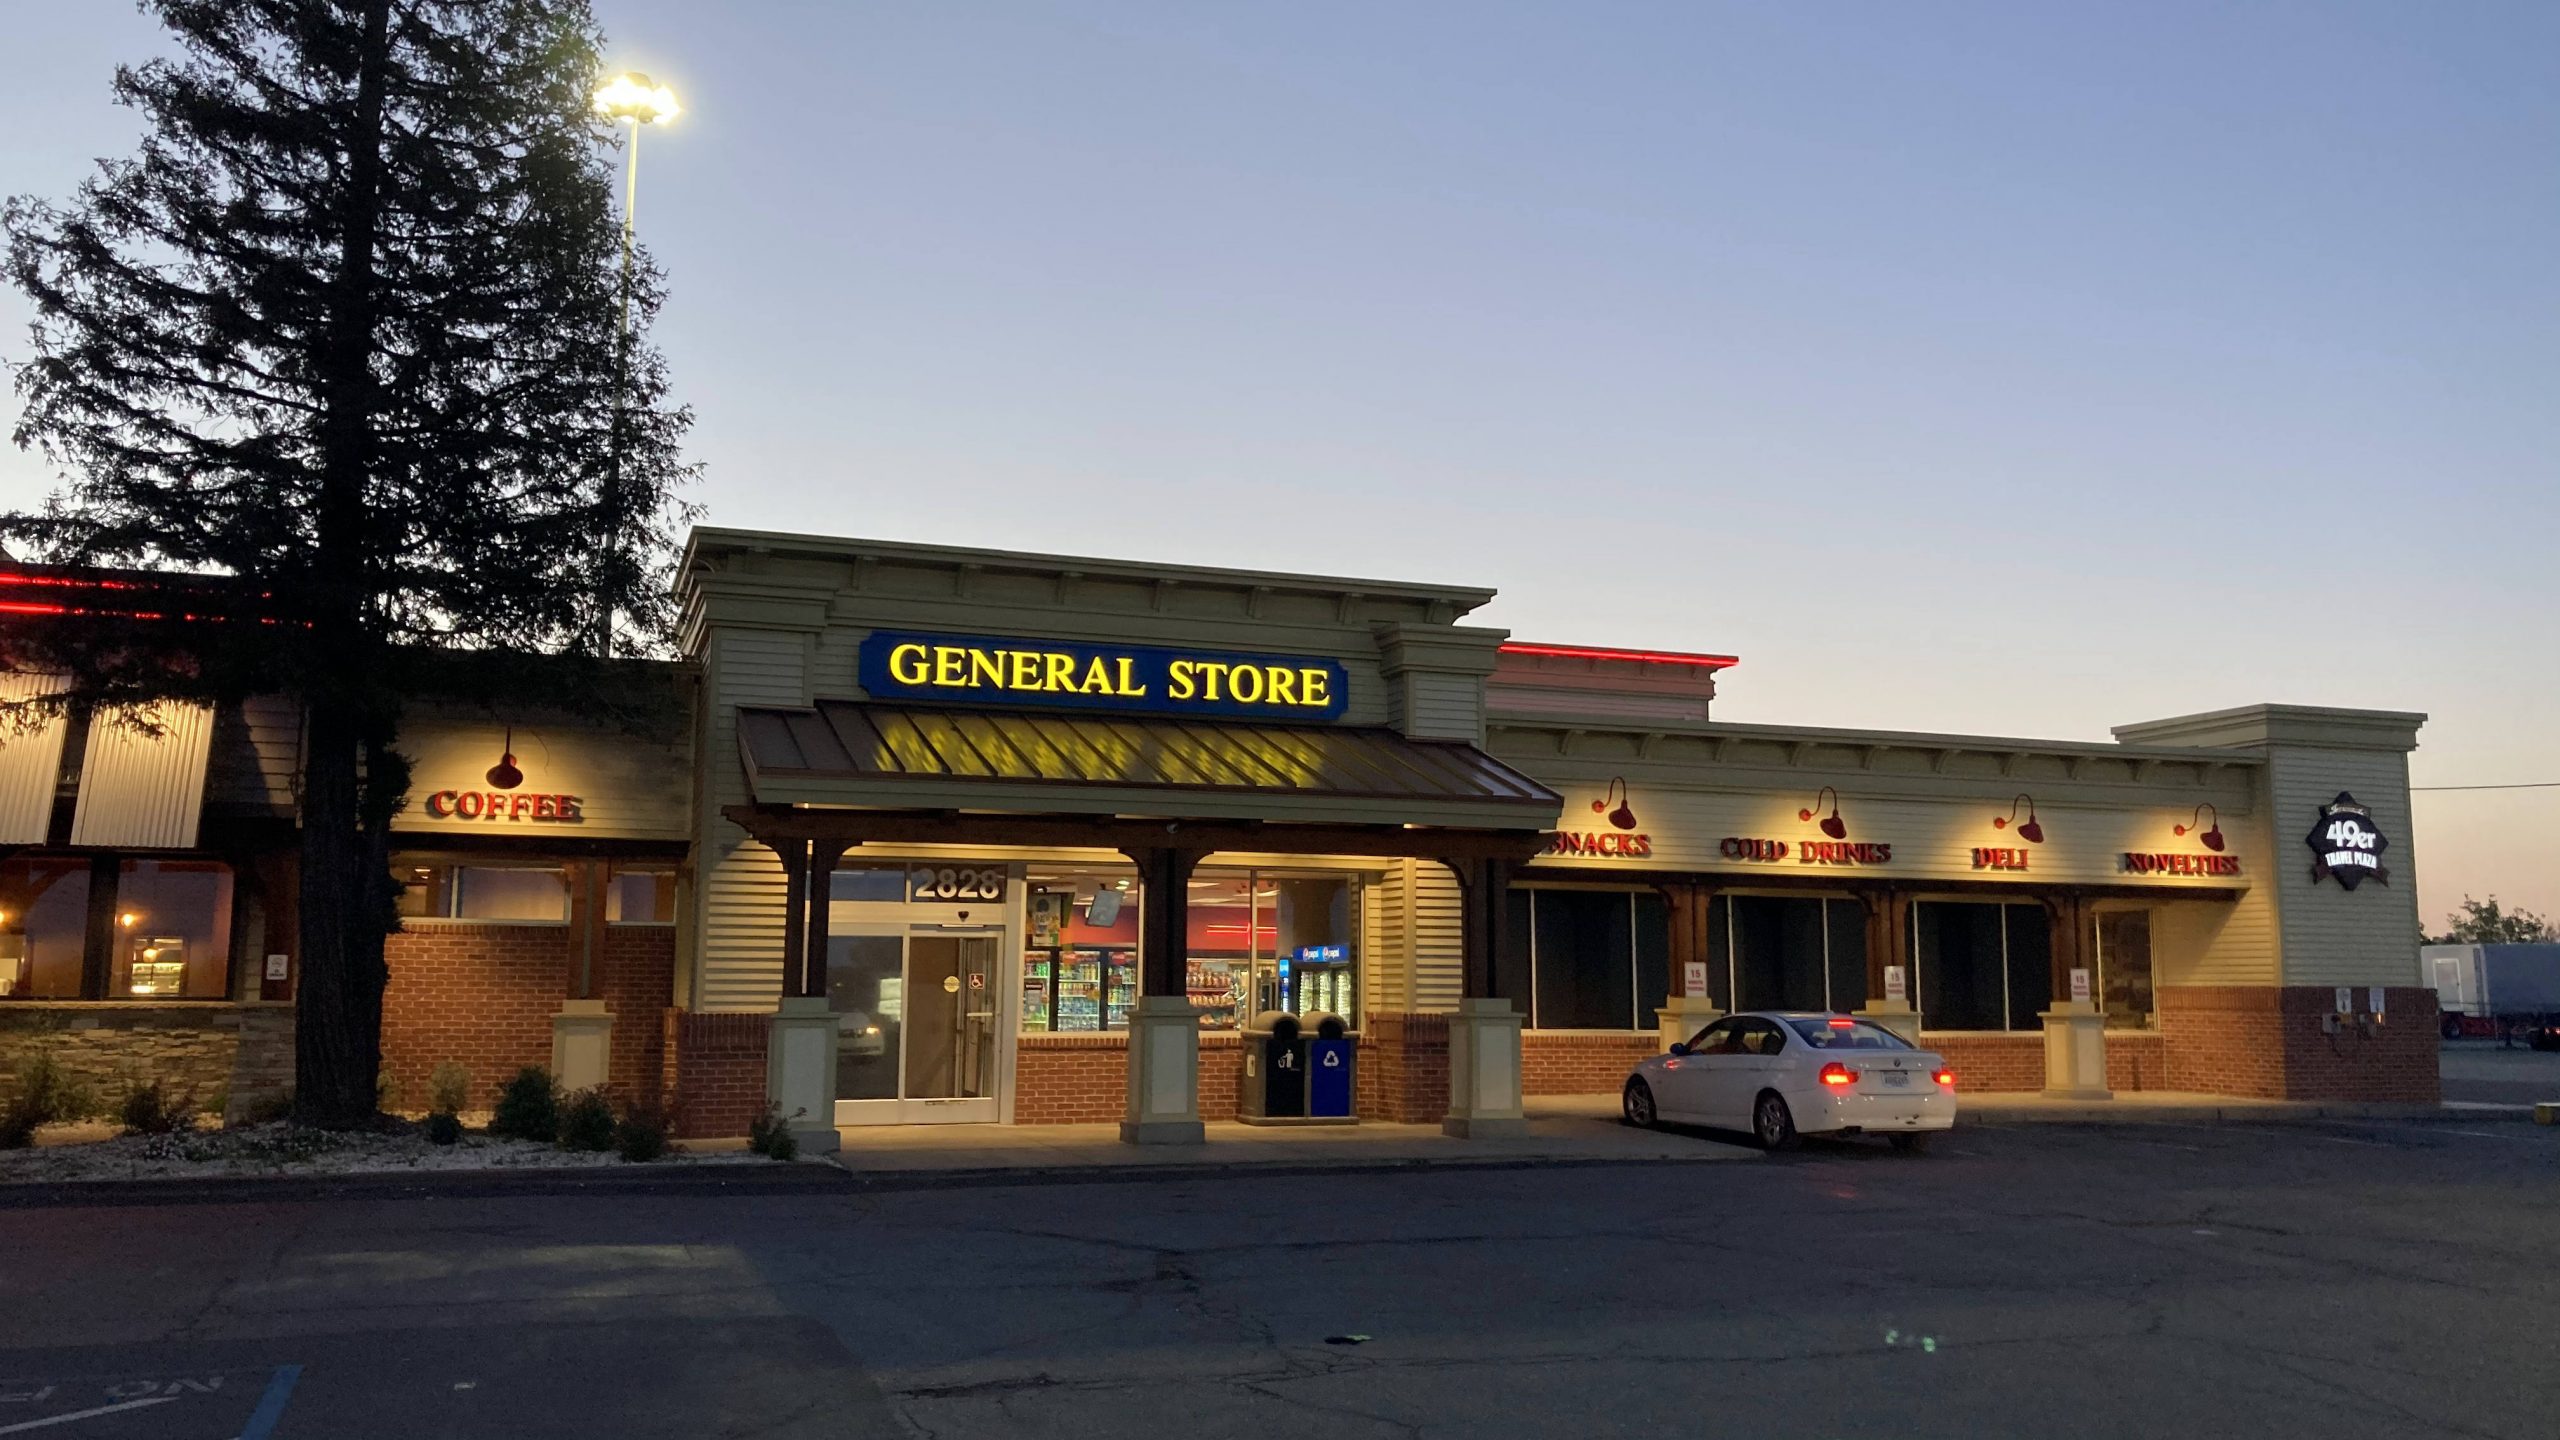 General store front